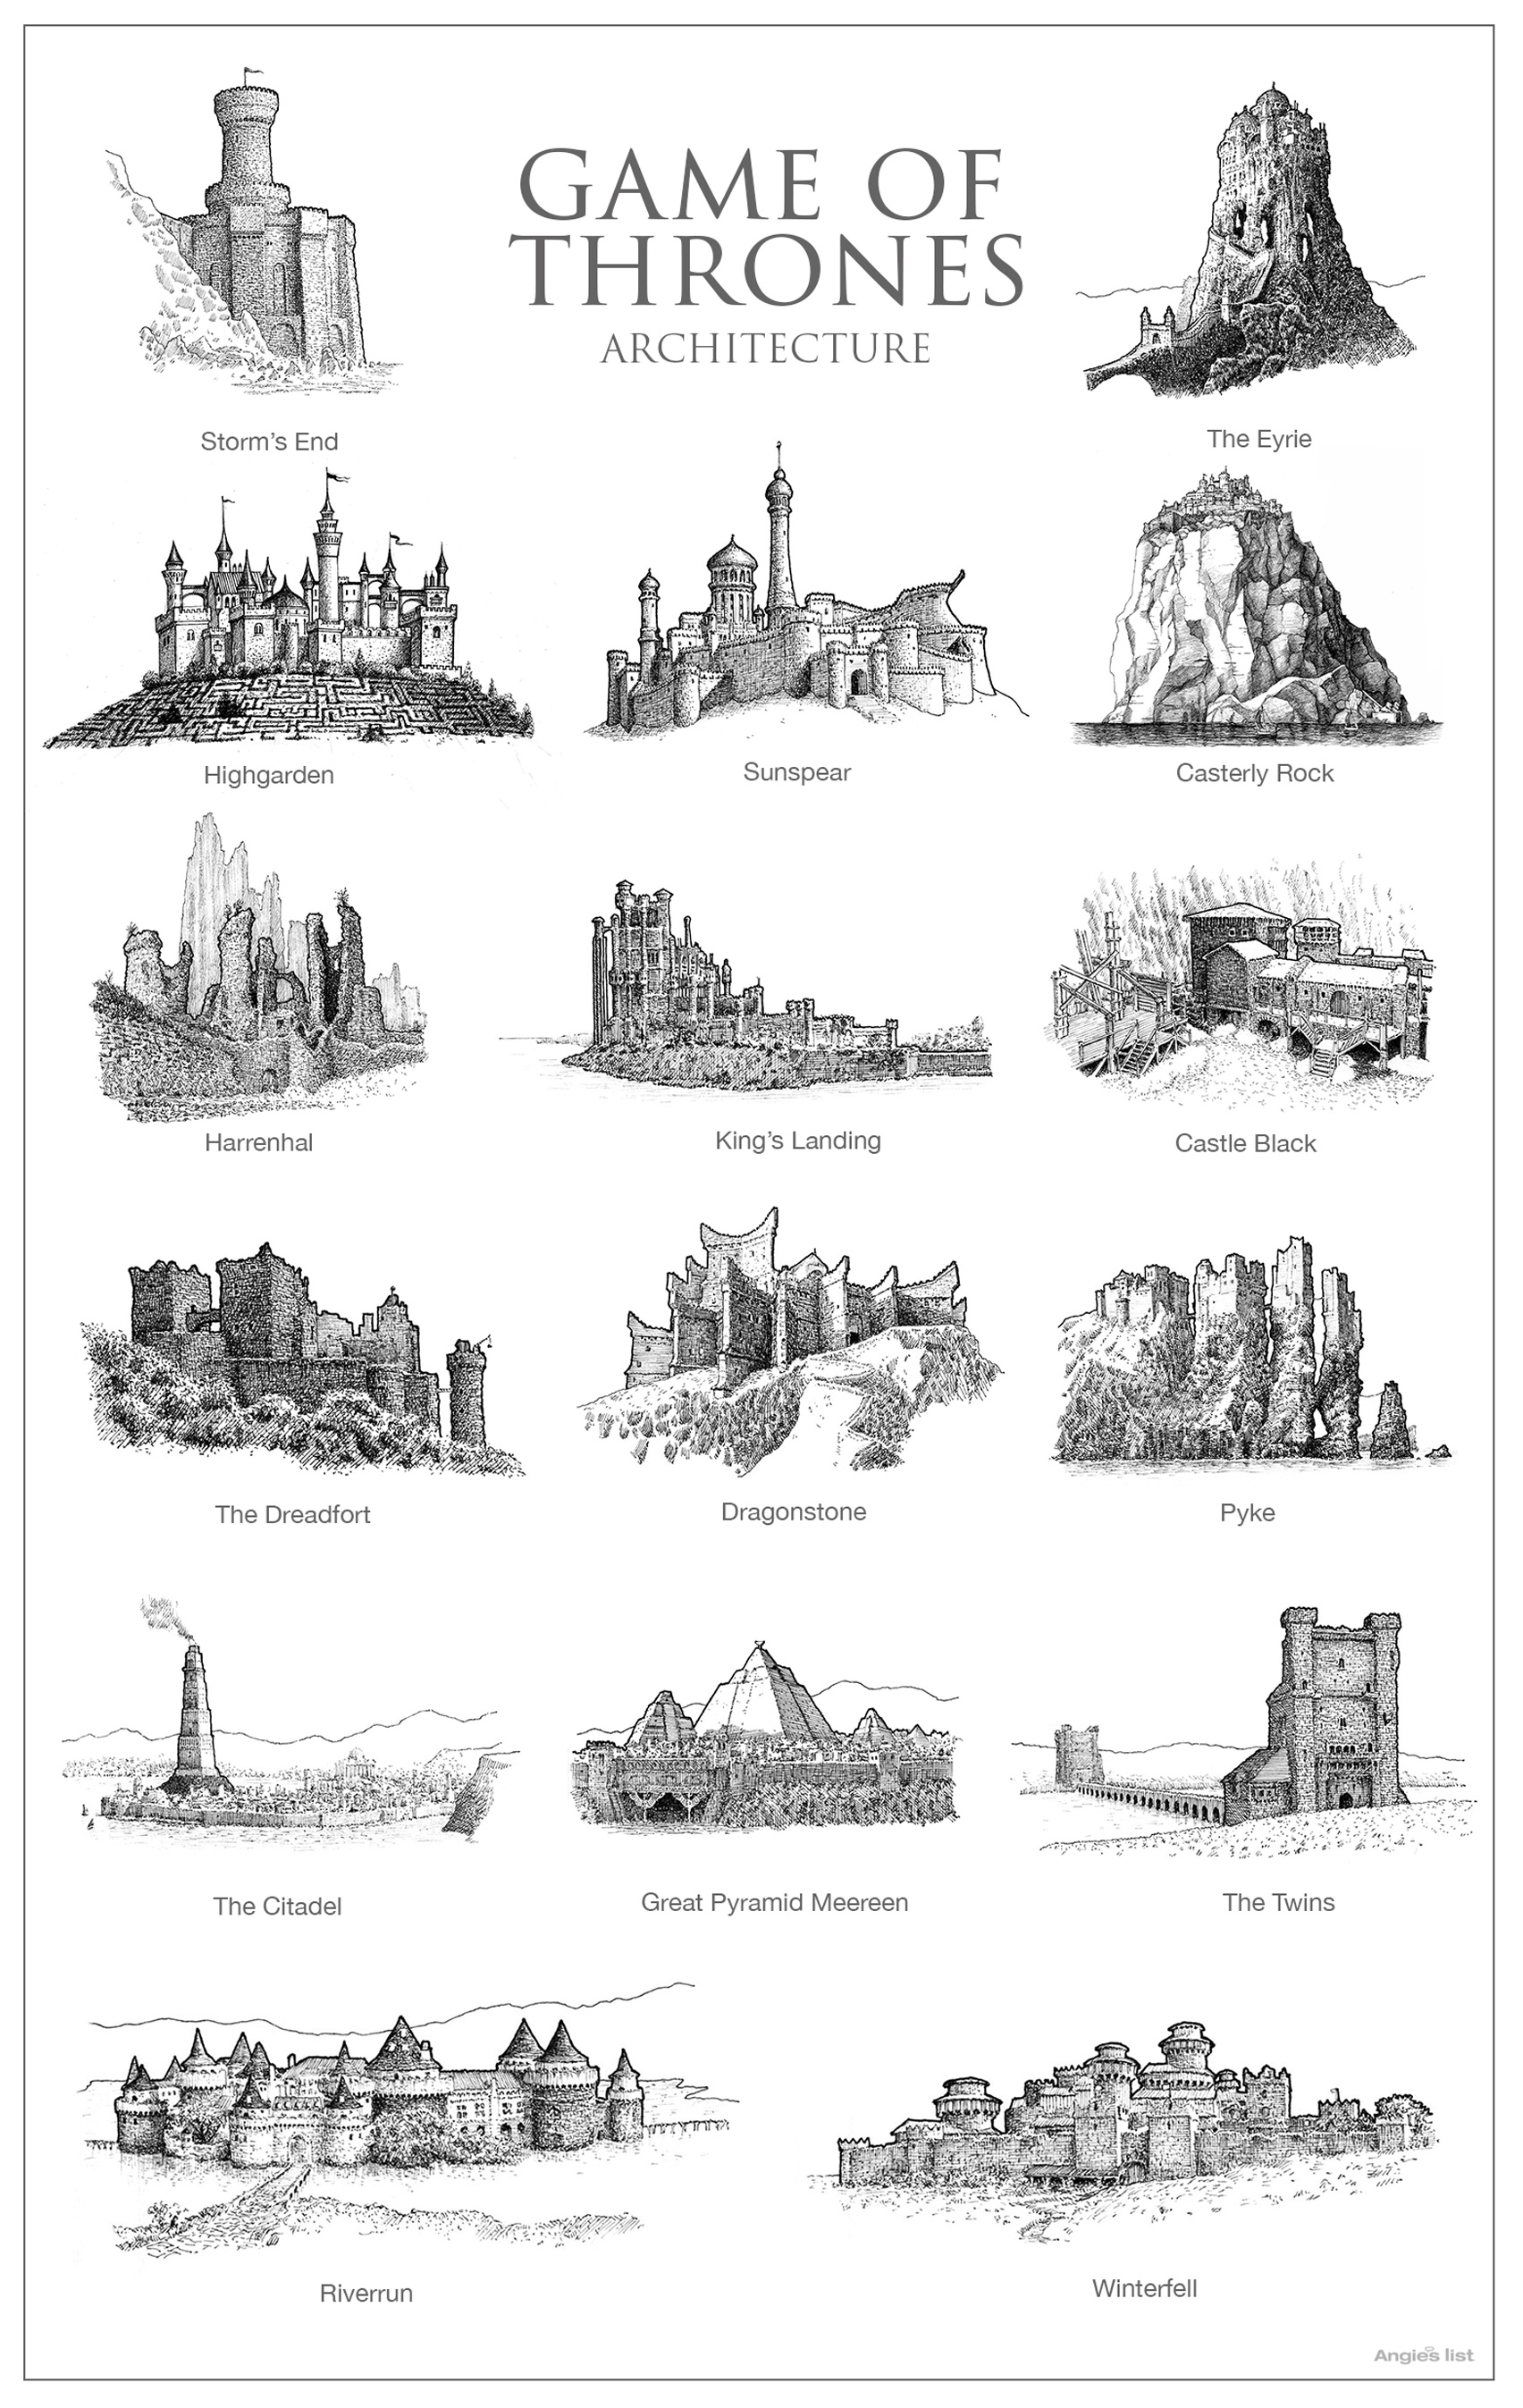 Game of Thrones architecture illustrations